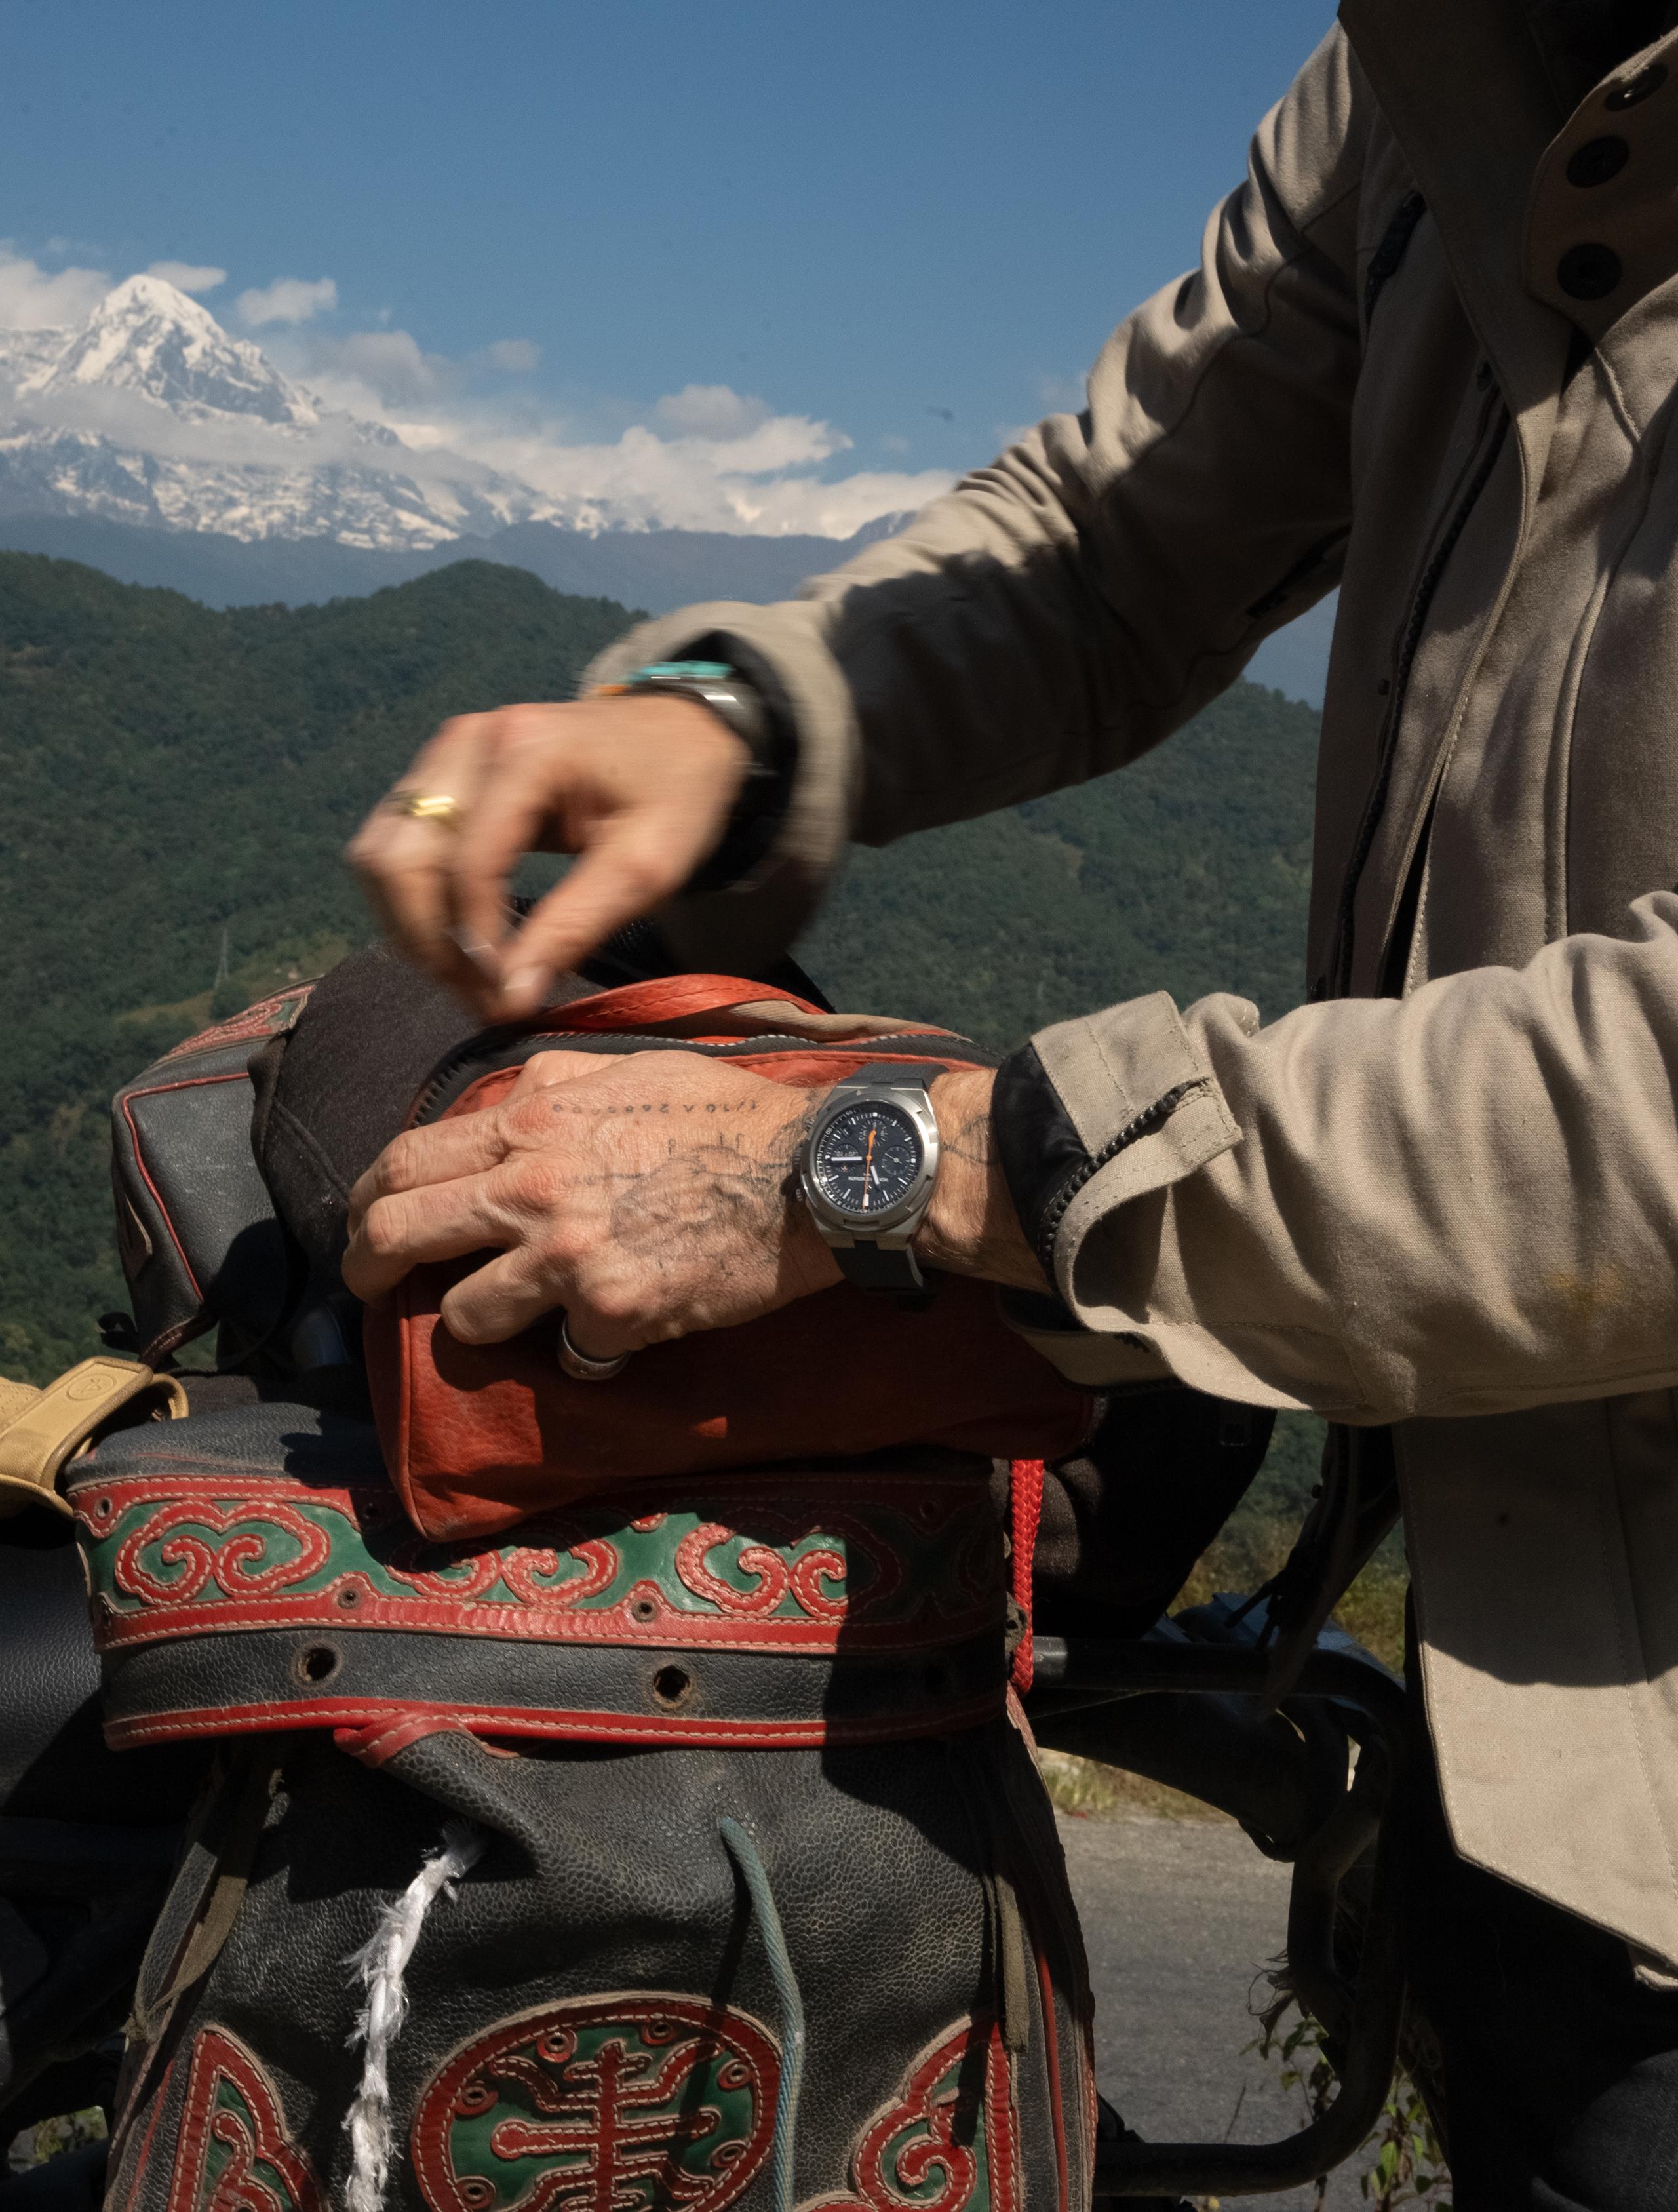 Crop of man unzipping Nepalese backpack on top of motorcycle